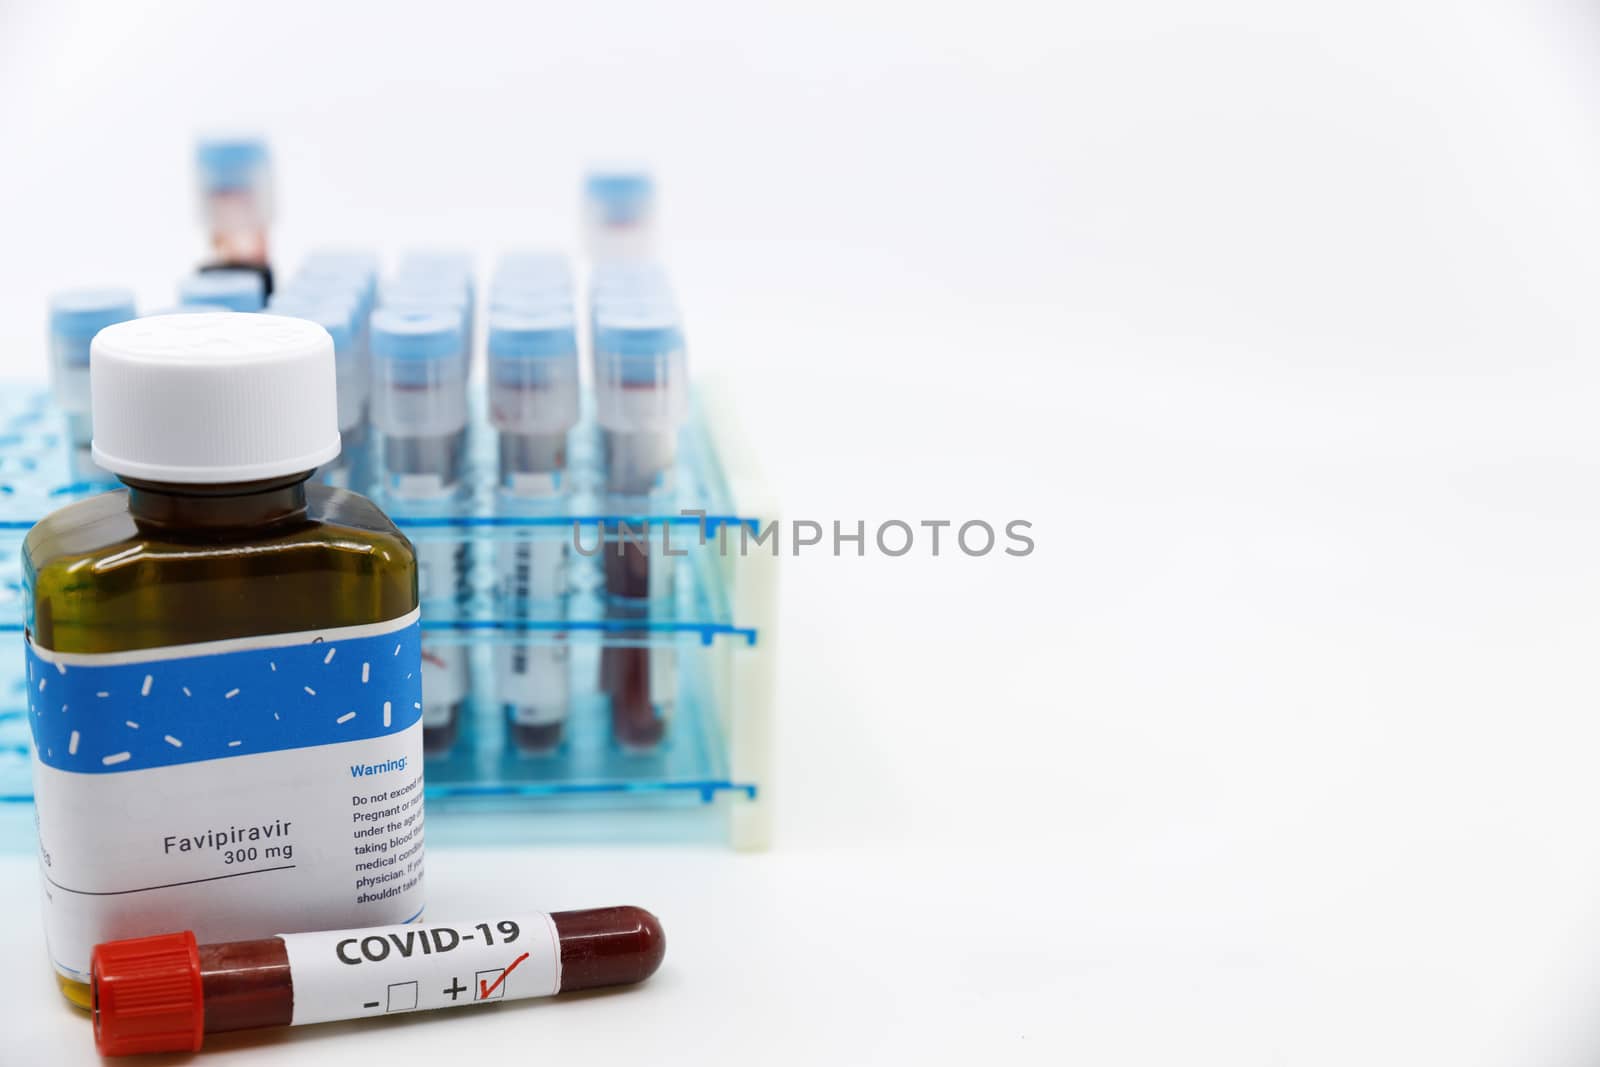 Dubai-UAE-Circa 2020:Coronavirus positive test in front of medicine.Concept of Favipiravir medicine with blood tests tubes on the background.Cure for coronavirus,COVID-19 treatment. by dugulan